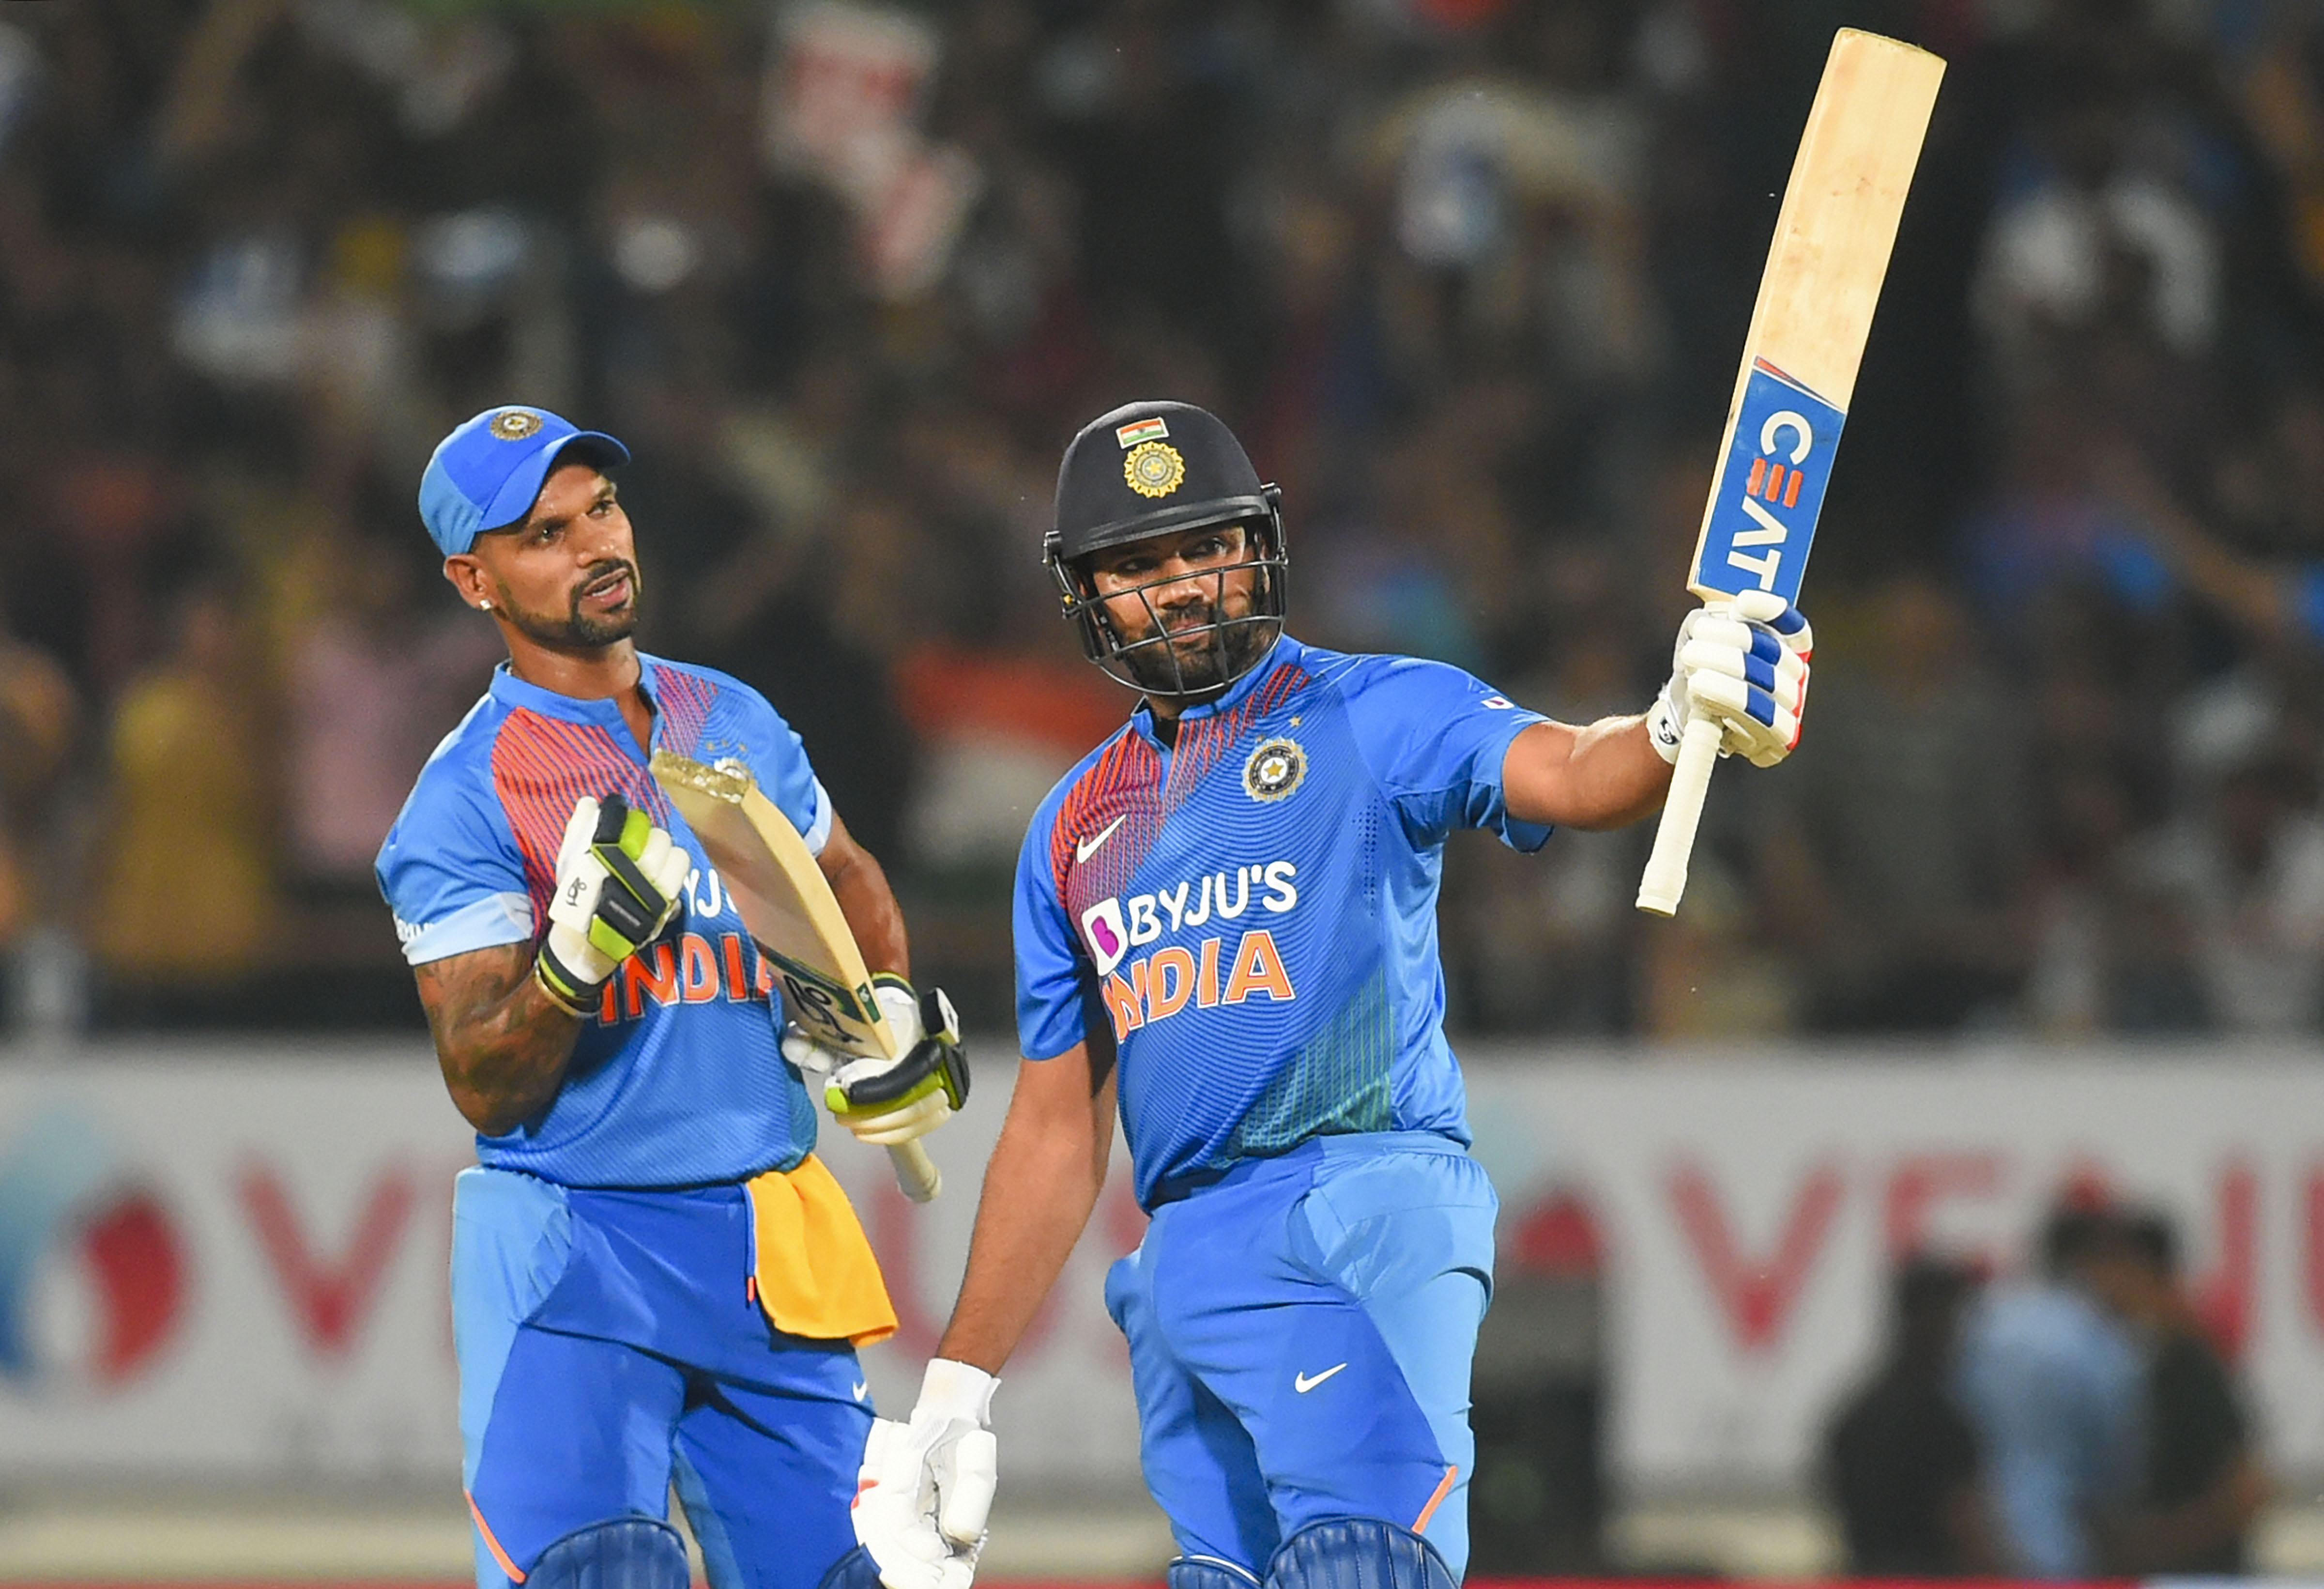 India beat Bangladesh by 8 wickets with Rohits blitzkrieg